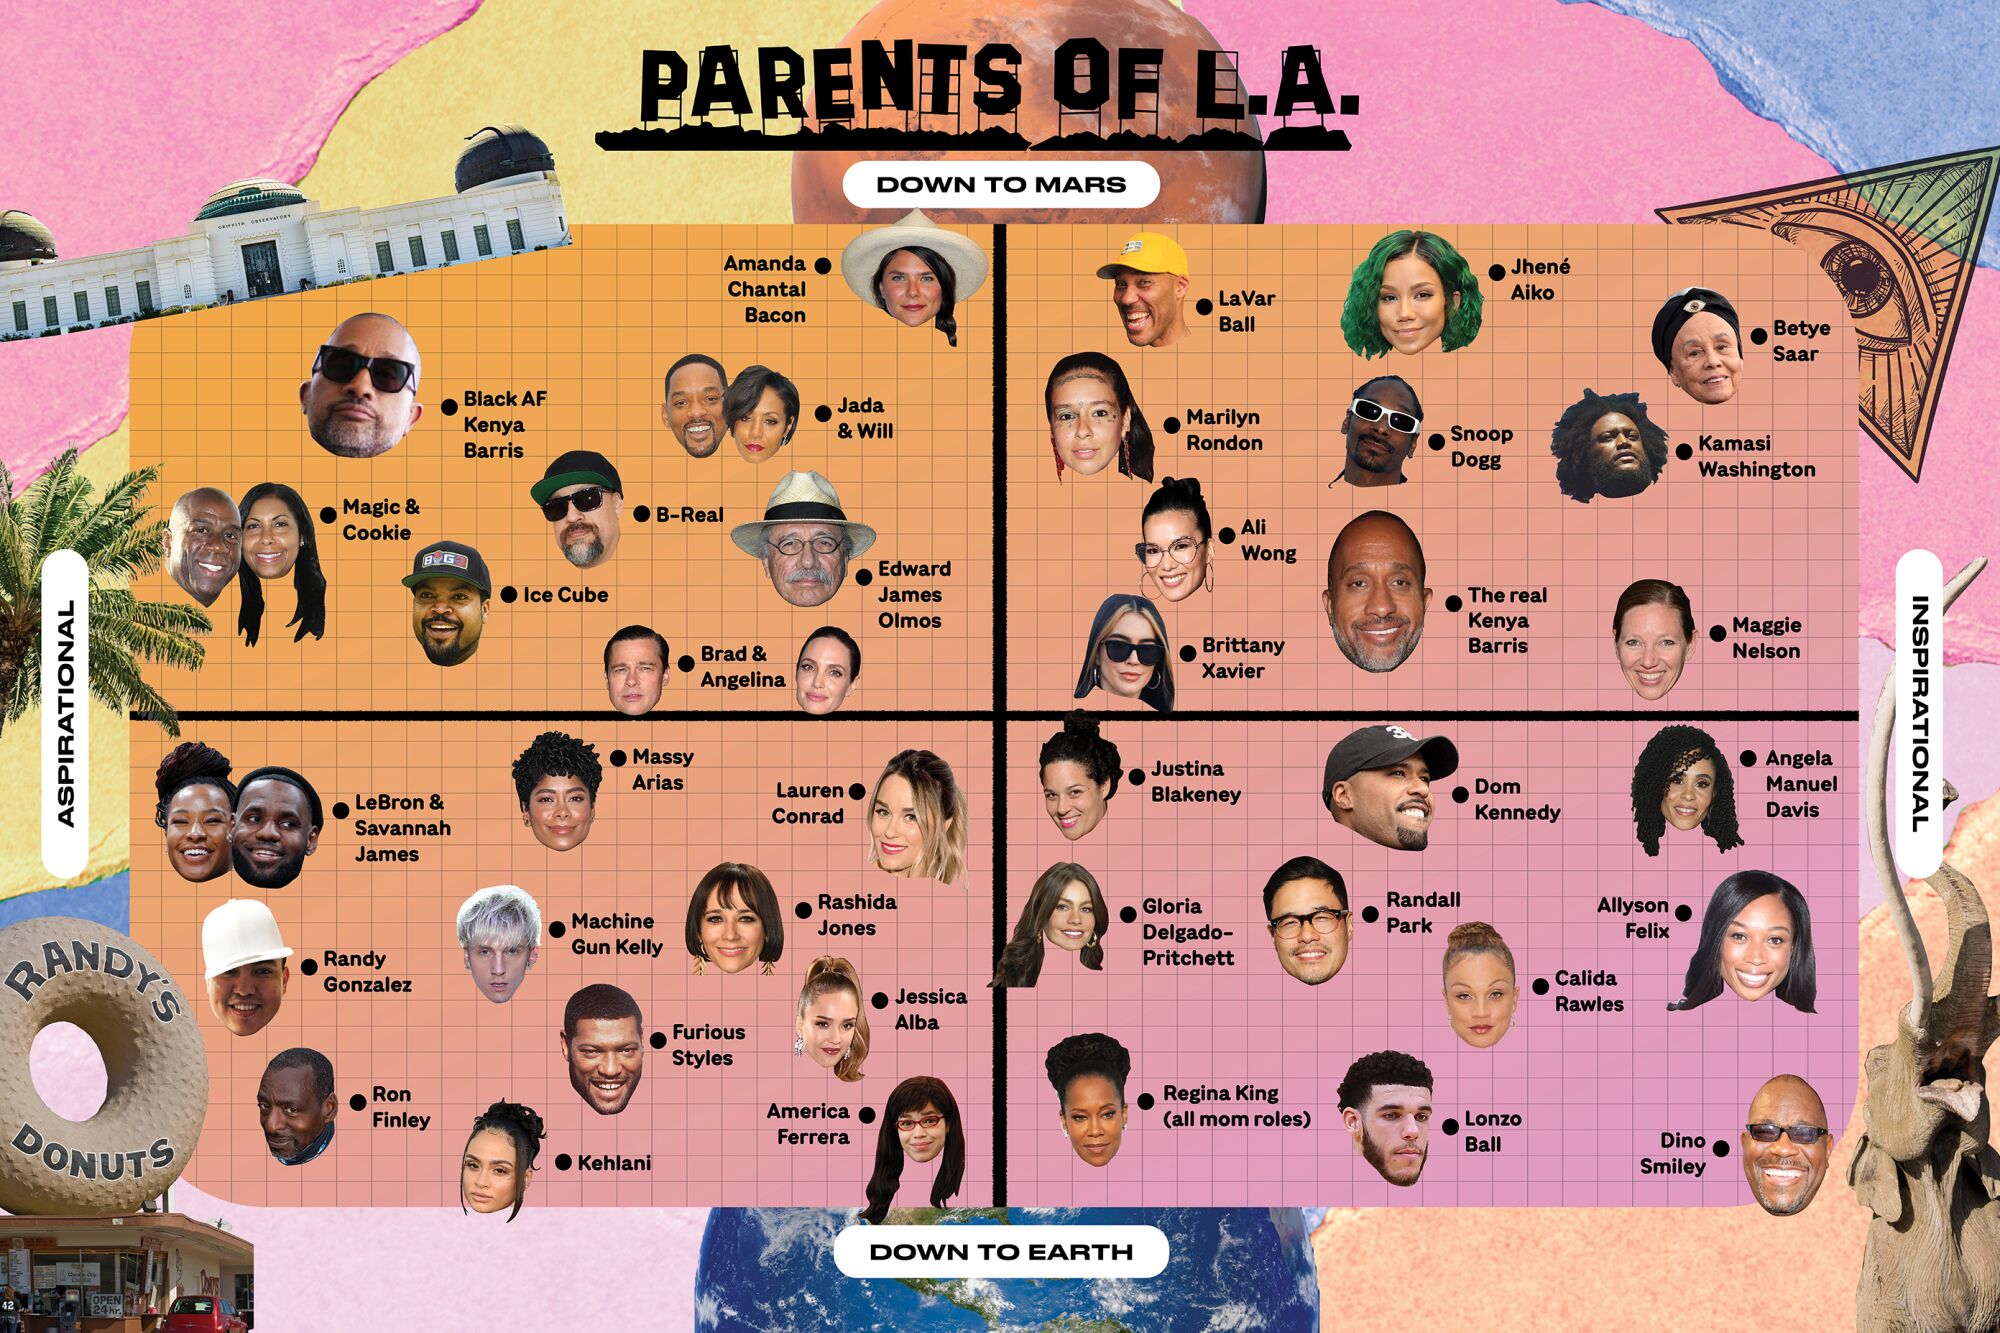 Colorful matrix of cool parents in L.A.